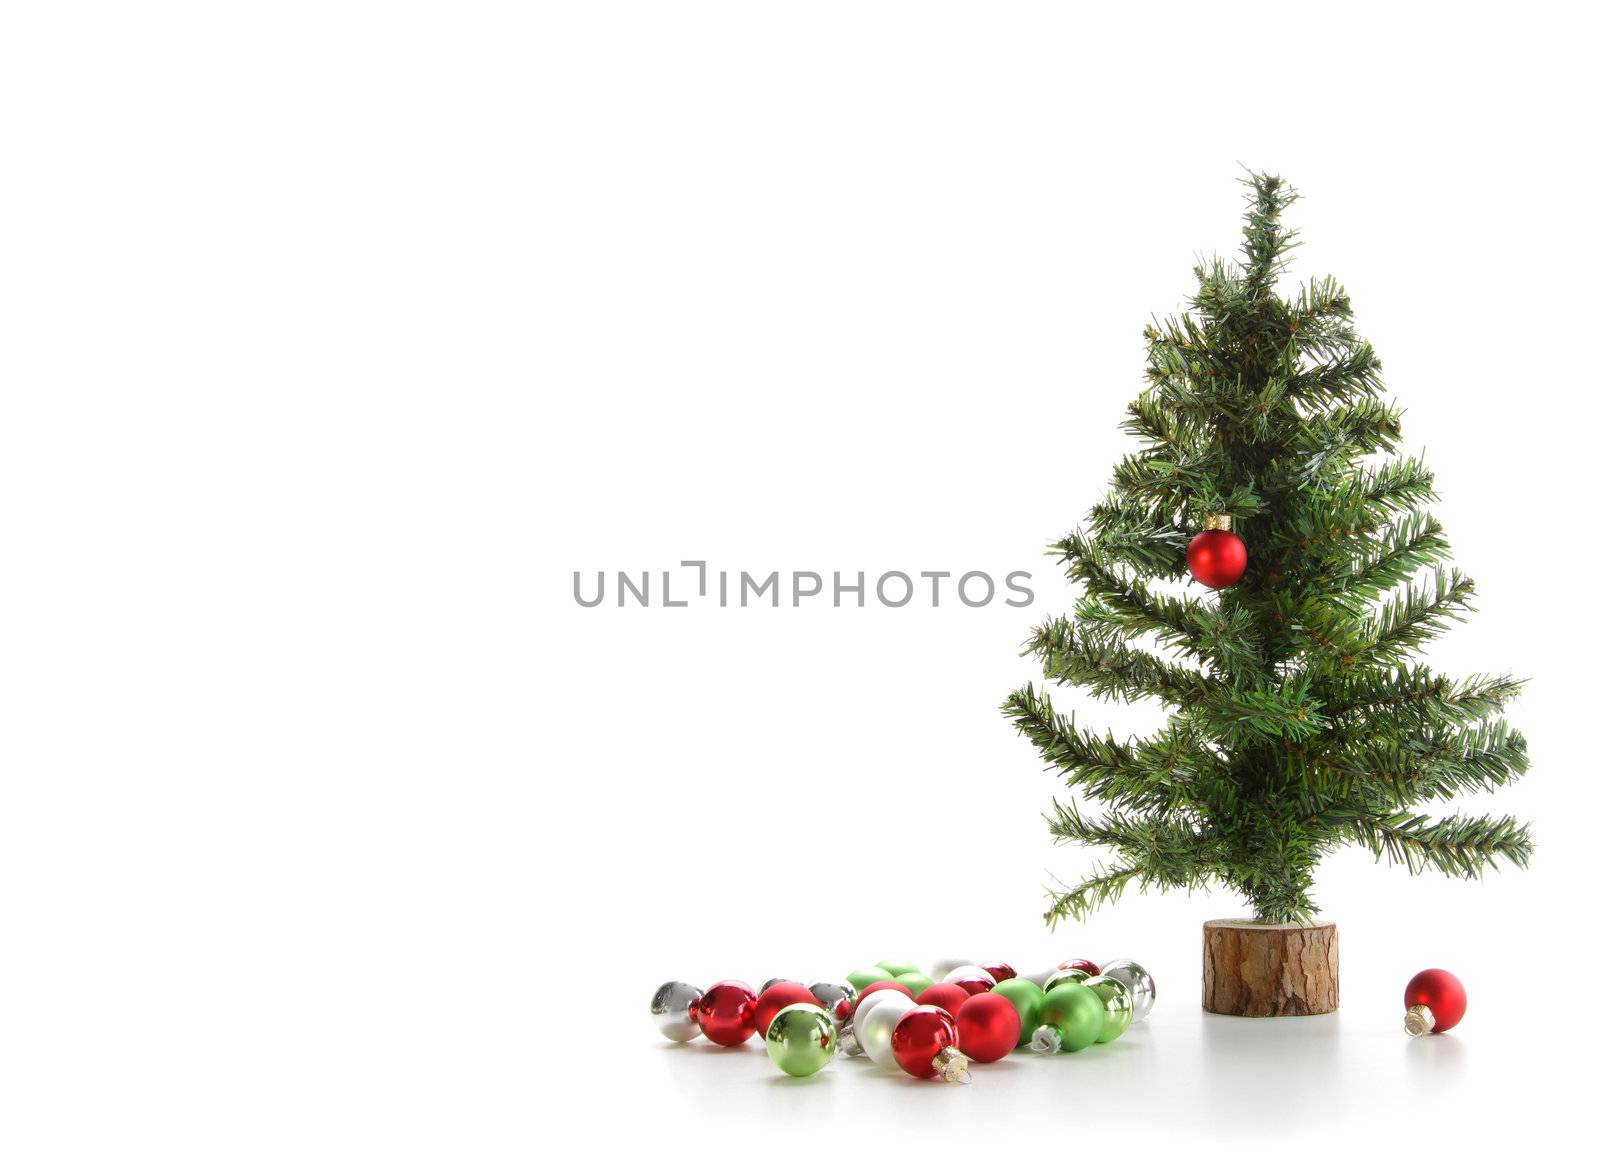 Small artifical tree with ornaments on white background